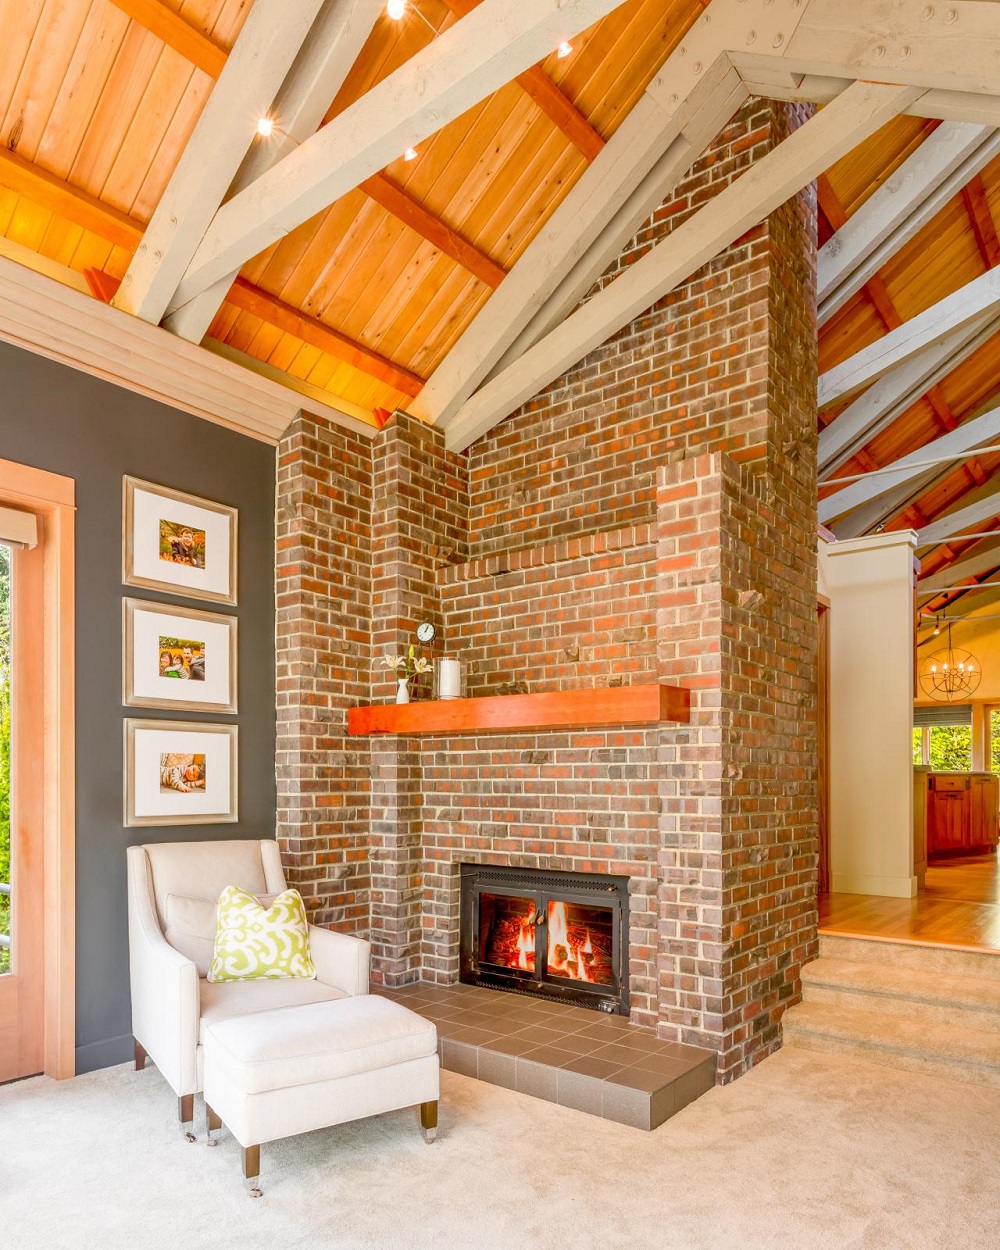 bf13-1 How to do a breathtaking renovation of the brick fireplace